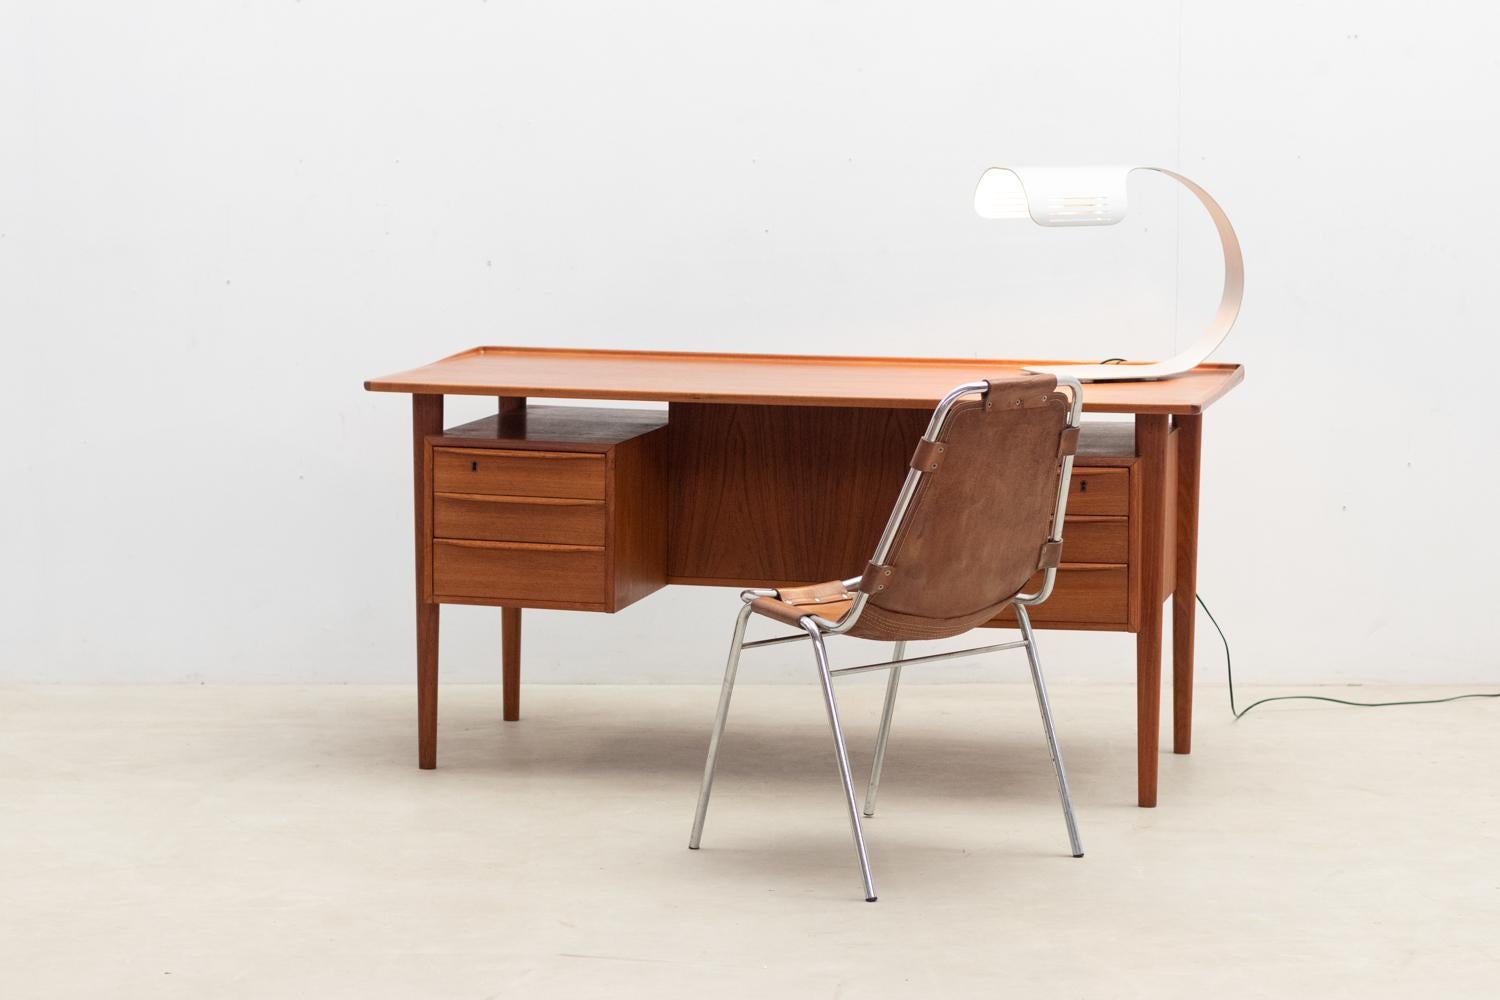 Mid-Century teak desk by Peter Løvig Nielsen, crafted in 1967 by Hedensted Møbelfabrik, Denmark. This double-faced desk, featuring a minimalist design and warm teak wood construction.

This desk has been stamped ( see picture ).
Great vintage